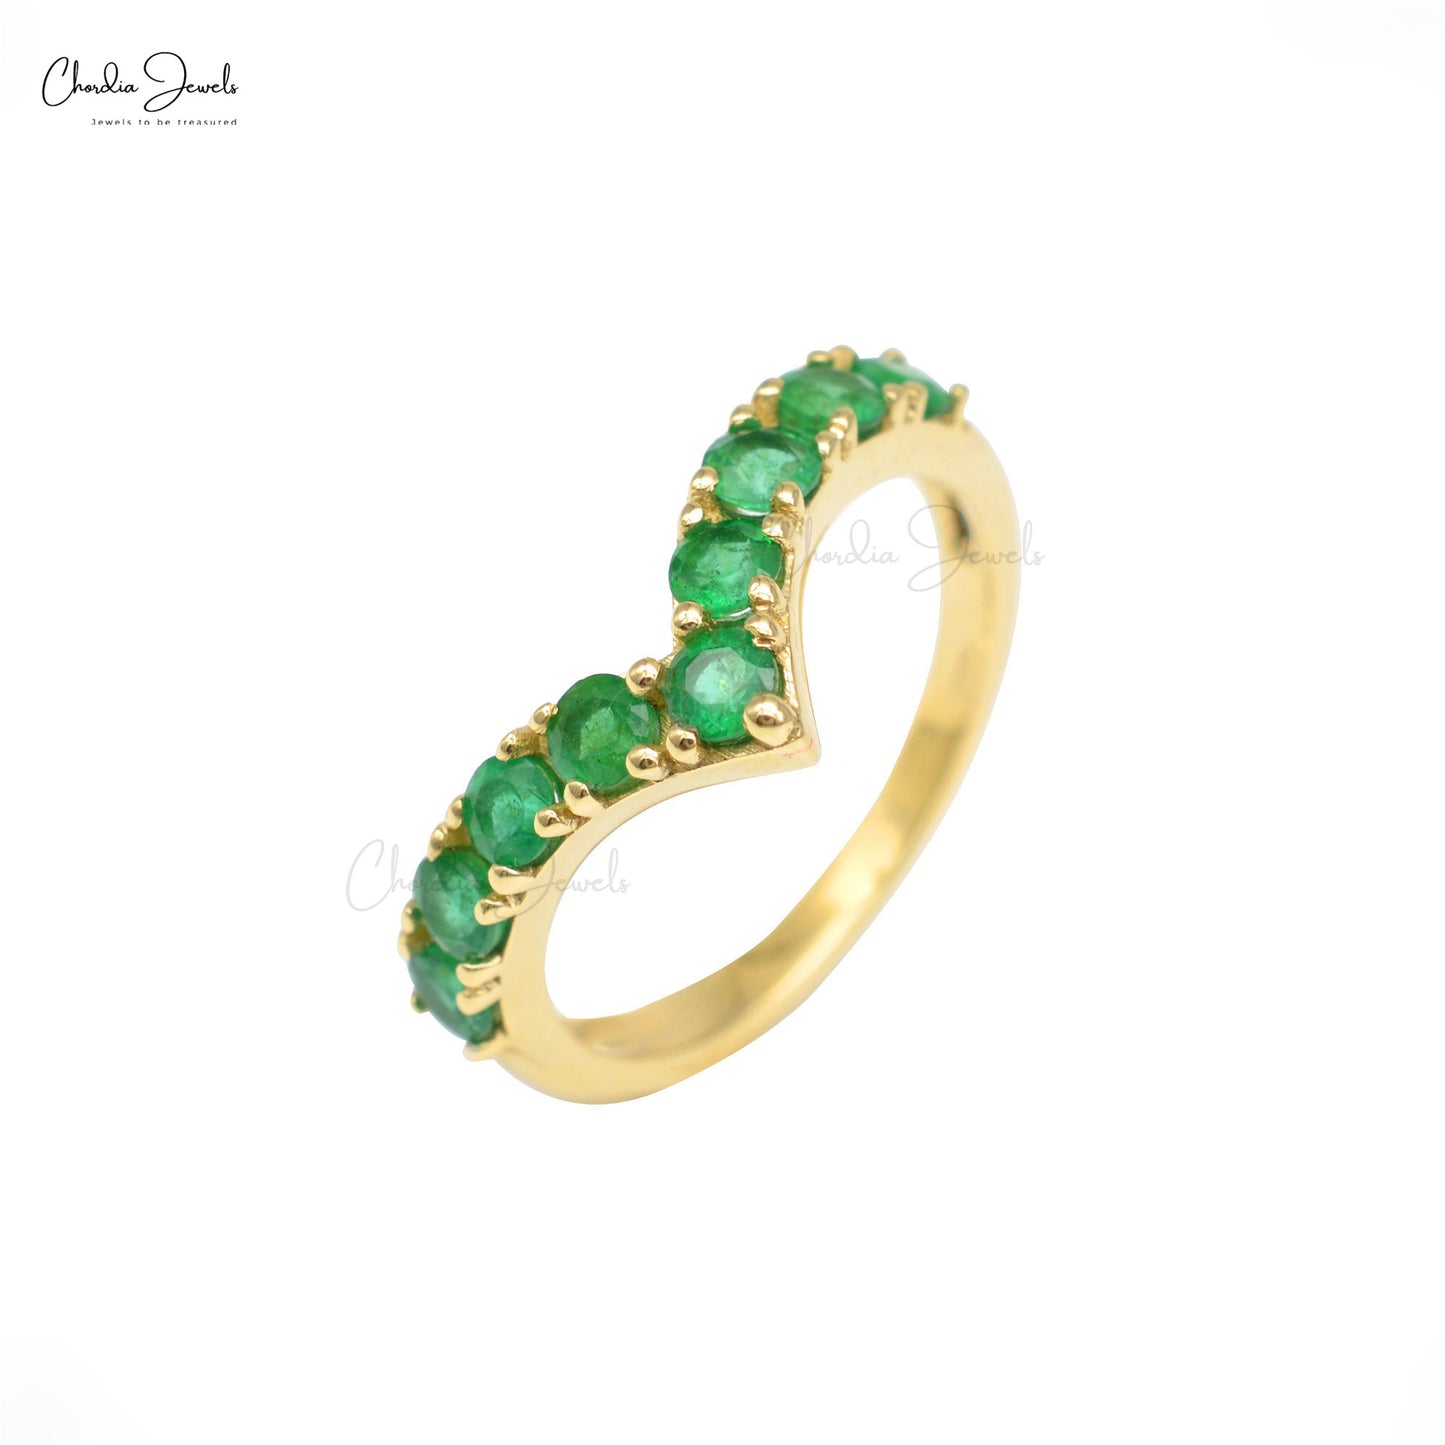 Adorn yourself with our emerald gemstone ring.